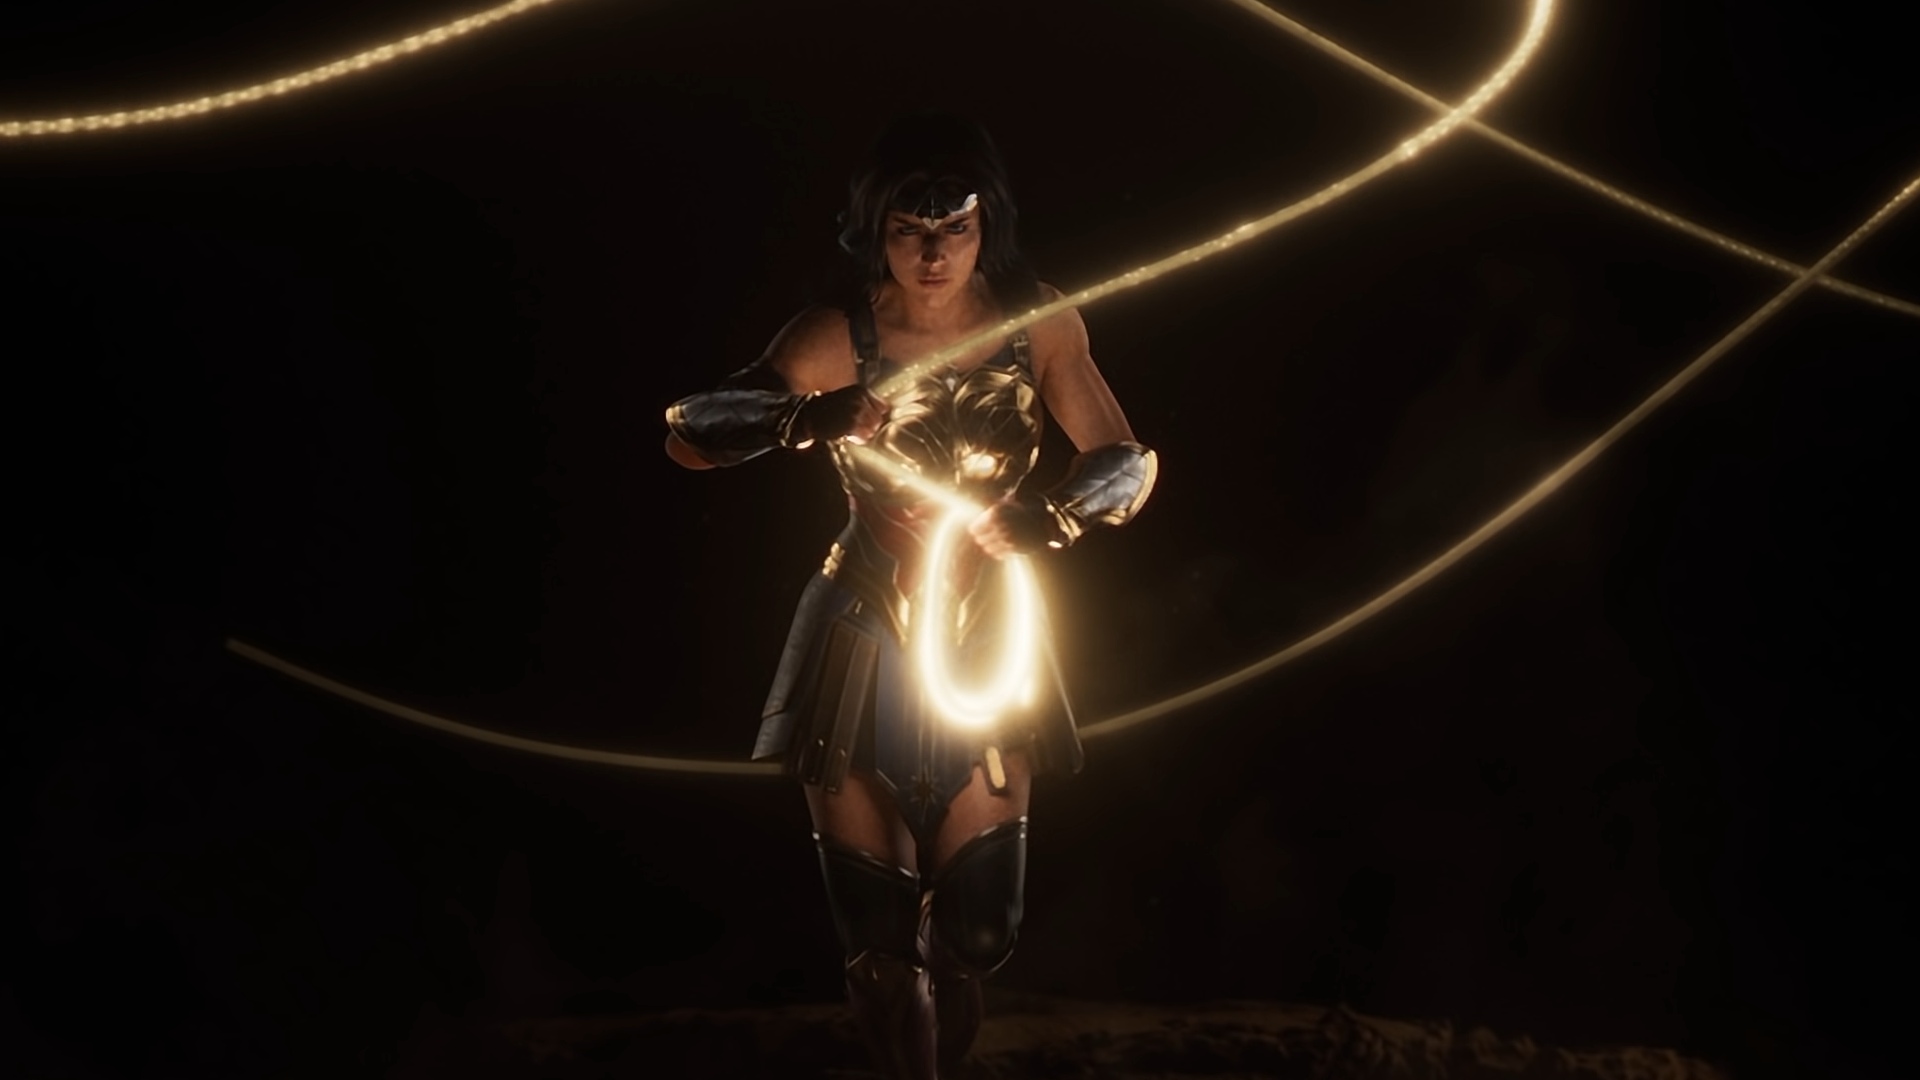 Mysterious new Wonder Woman game announced at The Game Awards - CNET